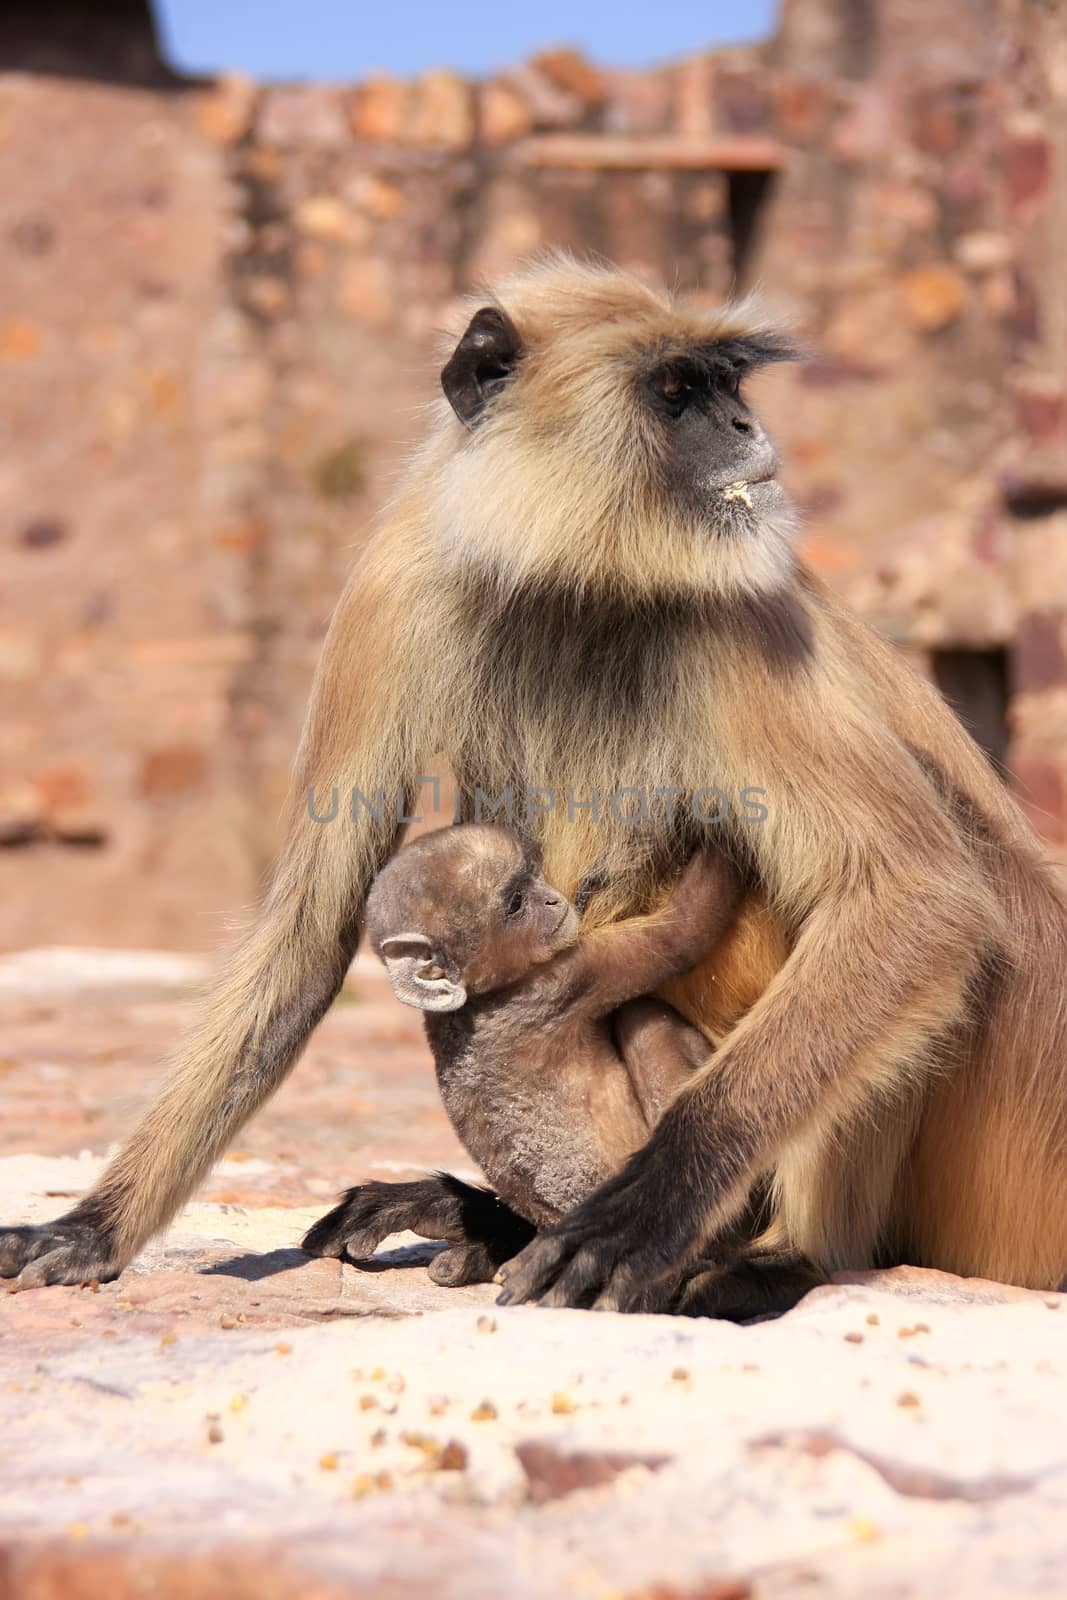 Gray langur (Semnopithecus dussumieri) with a baby sitting at Ranthambore Fort, Rajasthan, India